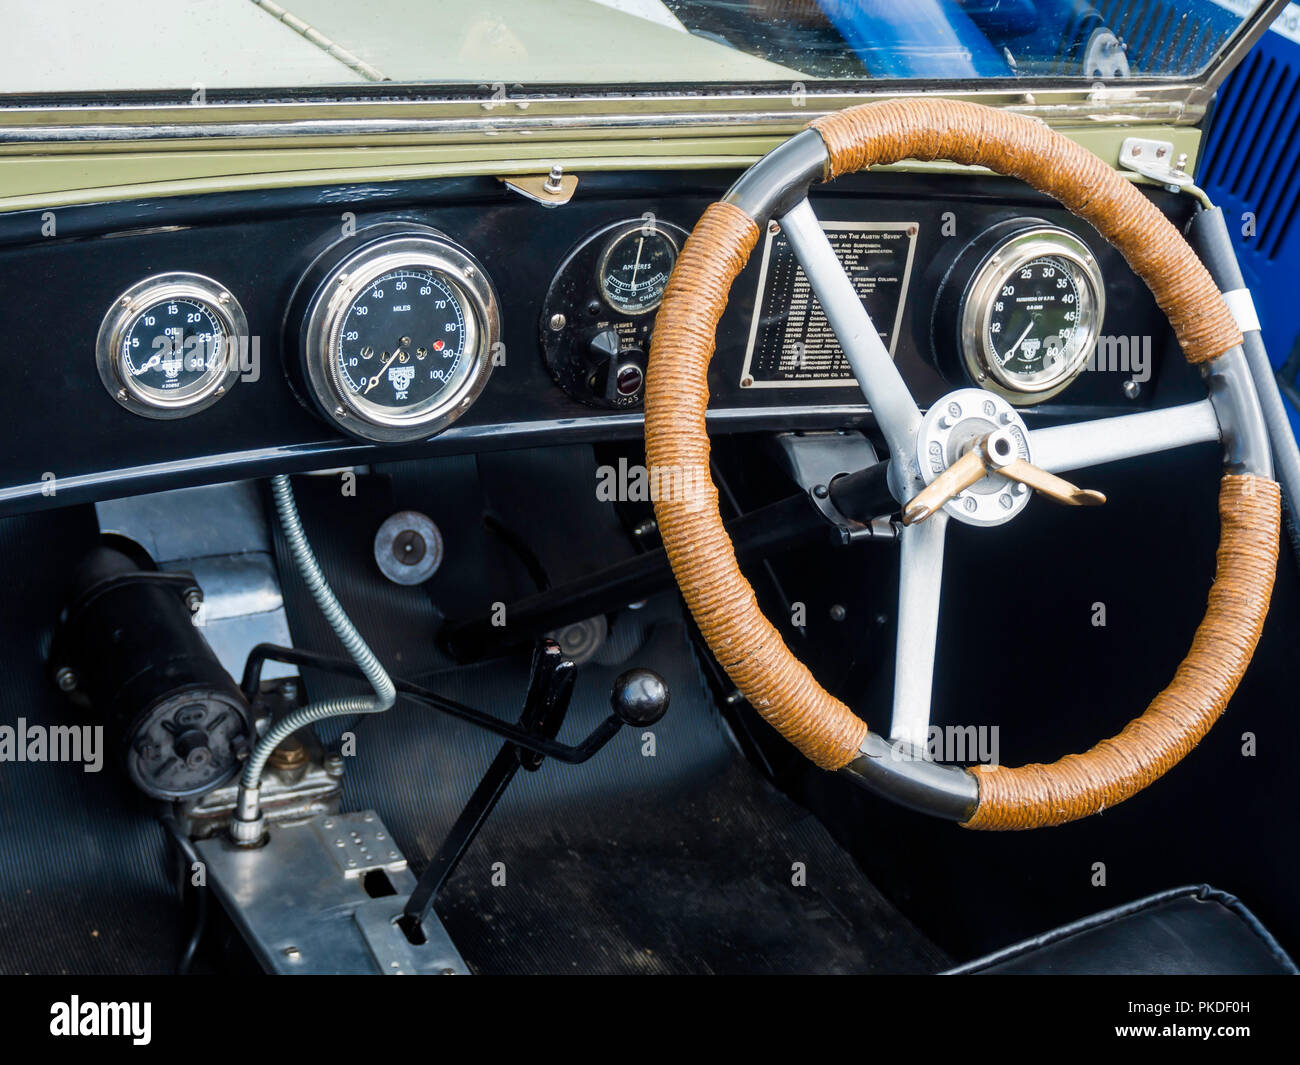 Cockpit of a 1930 Austin 7 Ulster open touring car at an Historic Motor Gathering in September 2018 at Saltburn Cleveland UK Stock Photo